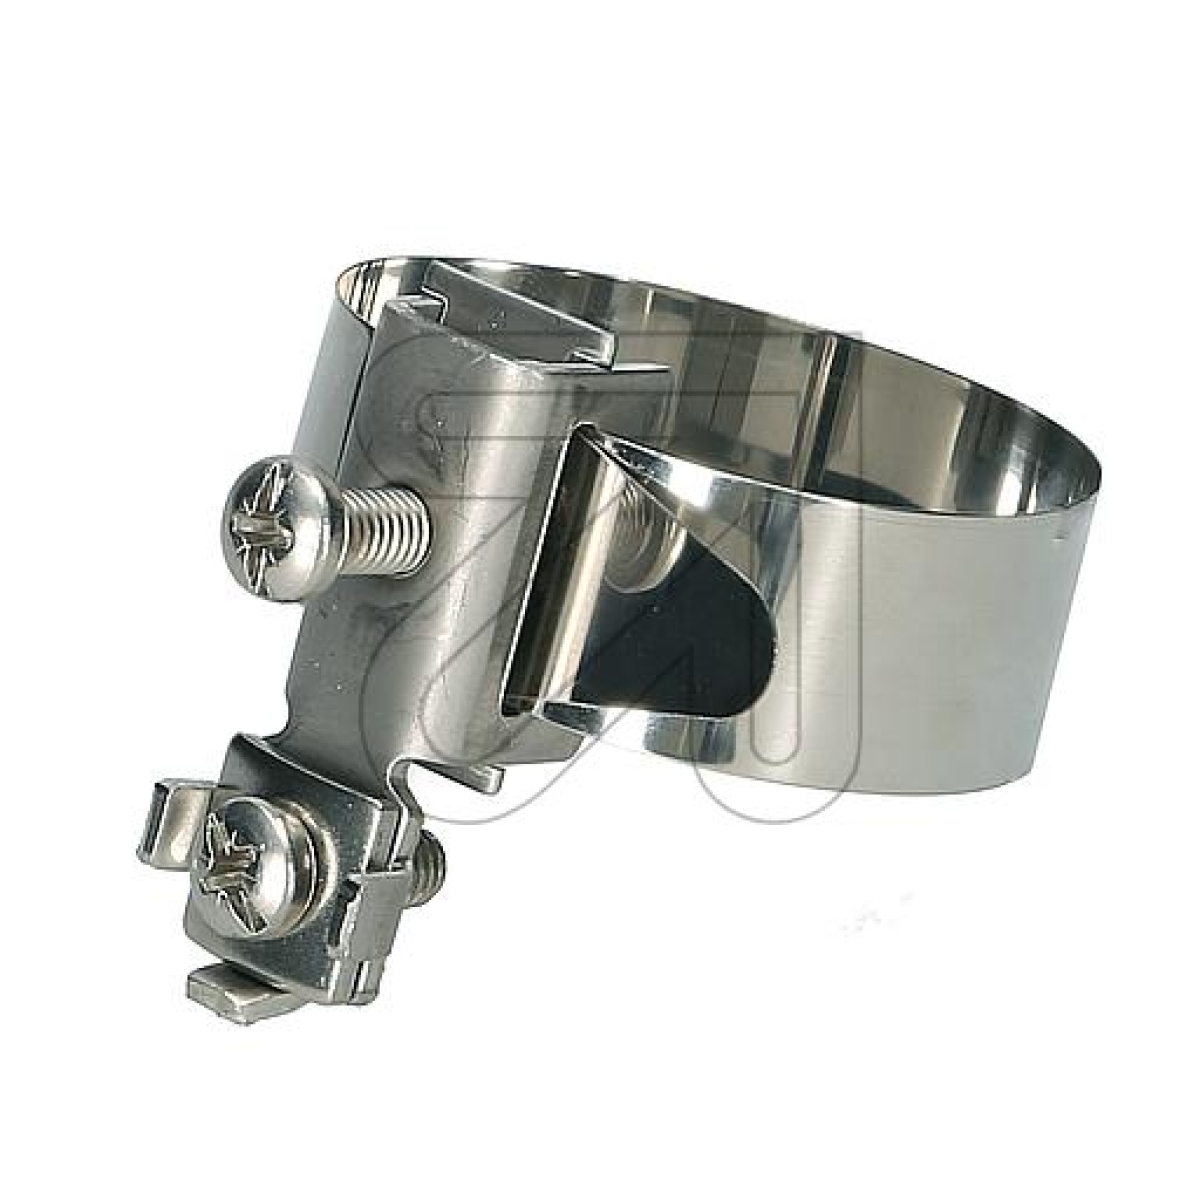 PE Pollmann GmbHEarthing strap clamp stainless steel EBS-1/ES 2020424-Price for 10 pcs.Article-No: 175060